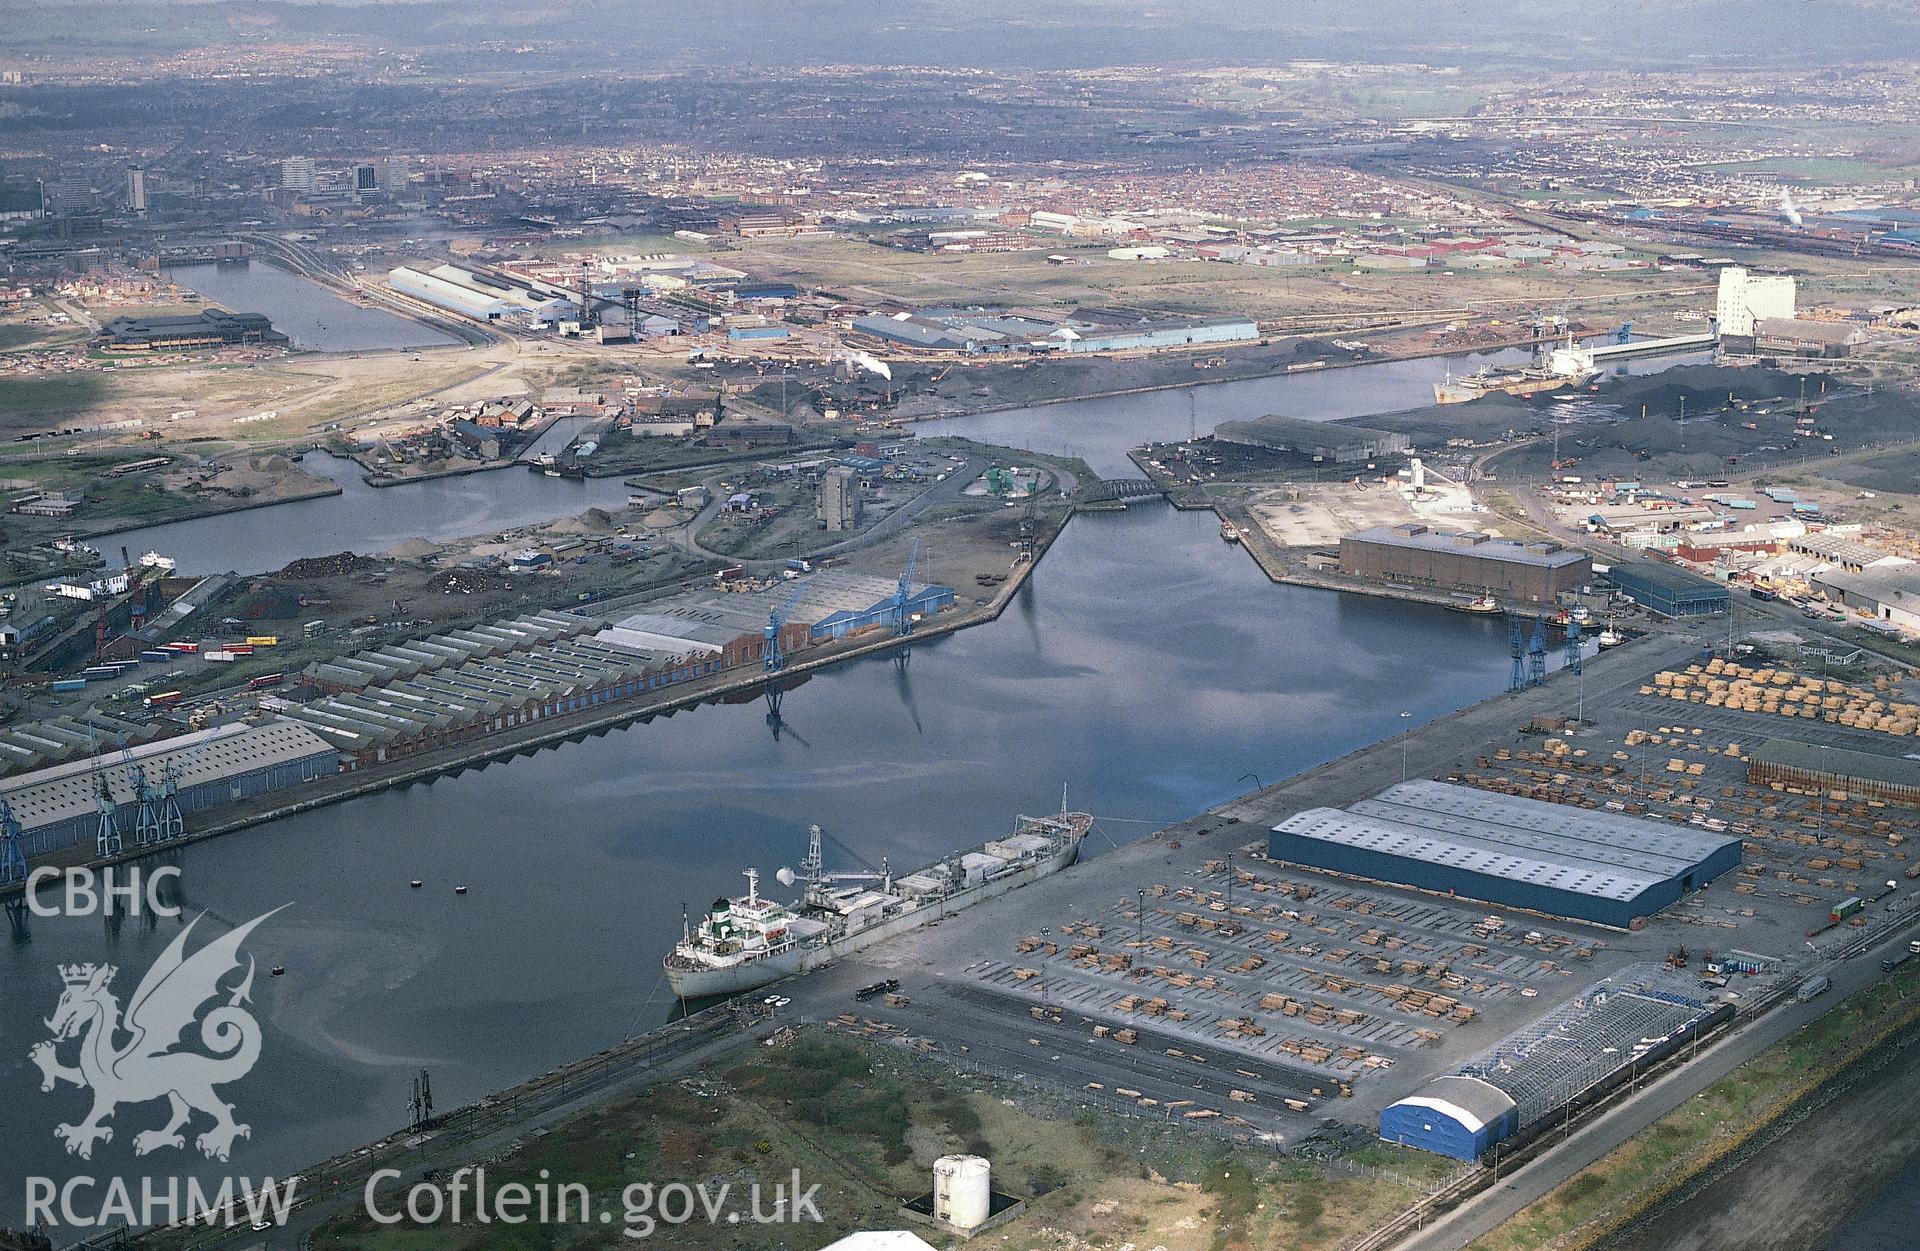 Slide of RCAHMW colour oblique aerial photograph of Queen Alexandra Dock, Cardiff Bay, taken by C.R. Musson, 26/3/1990.